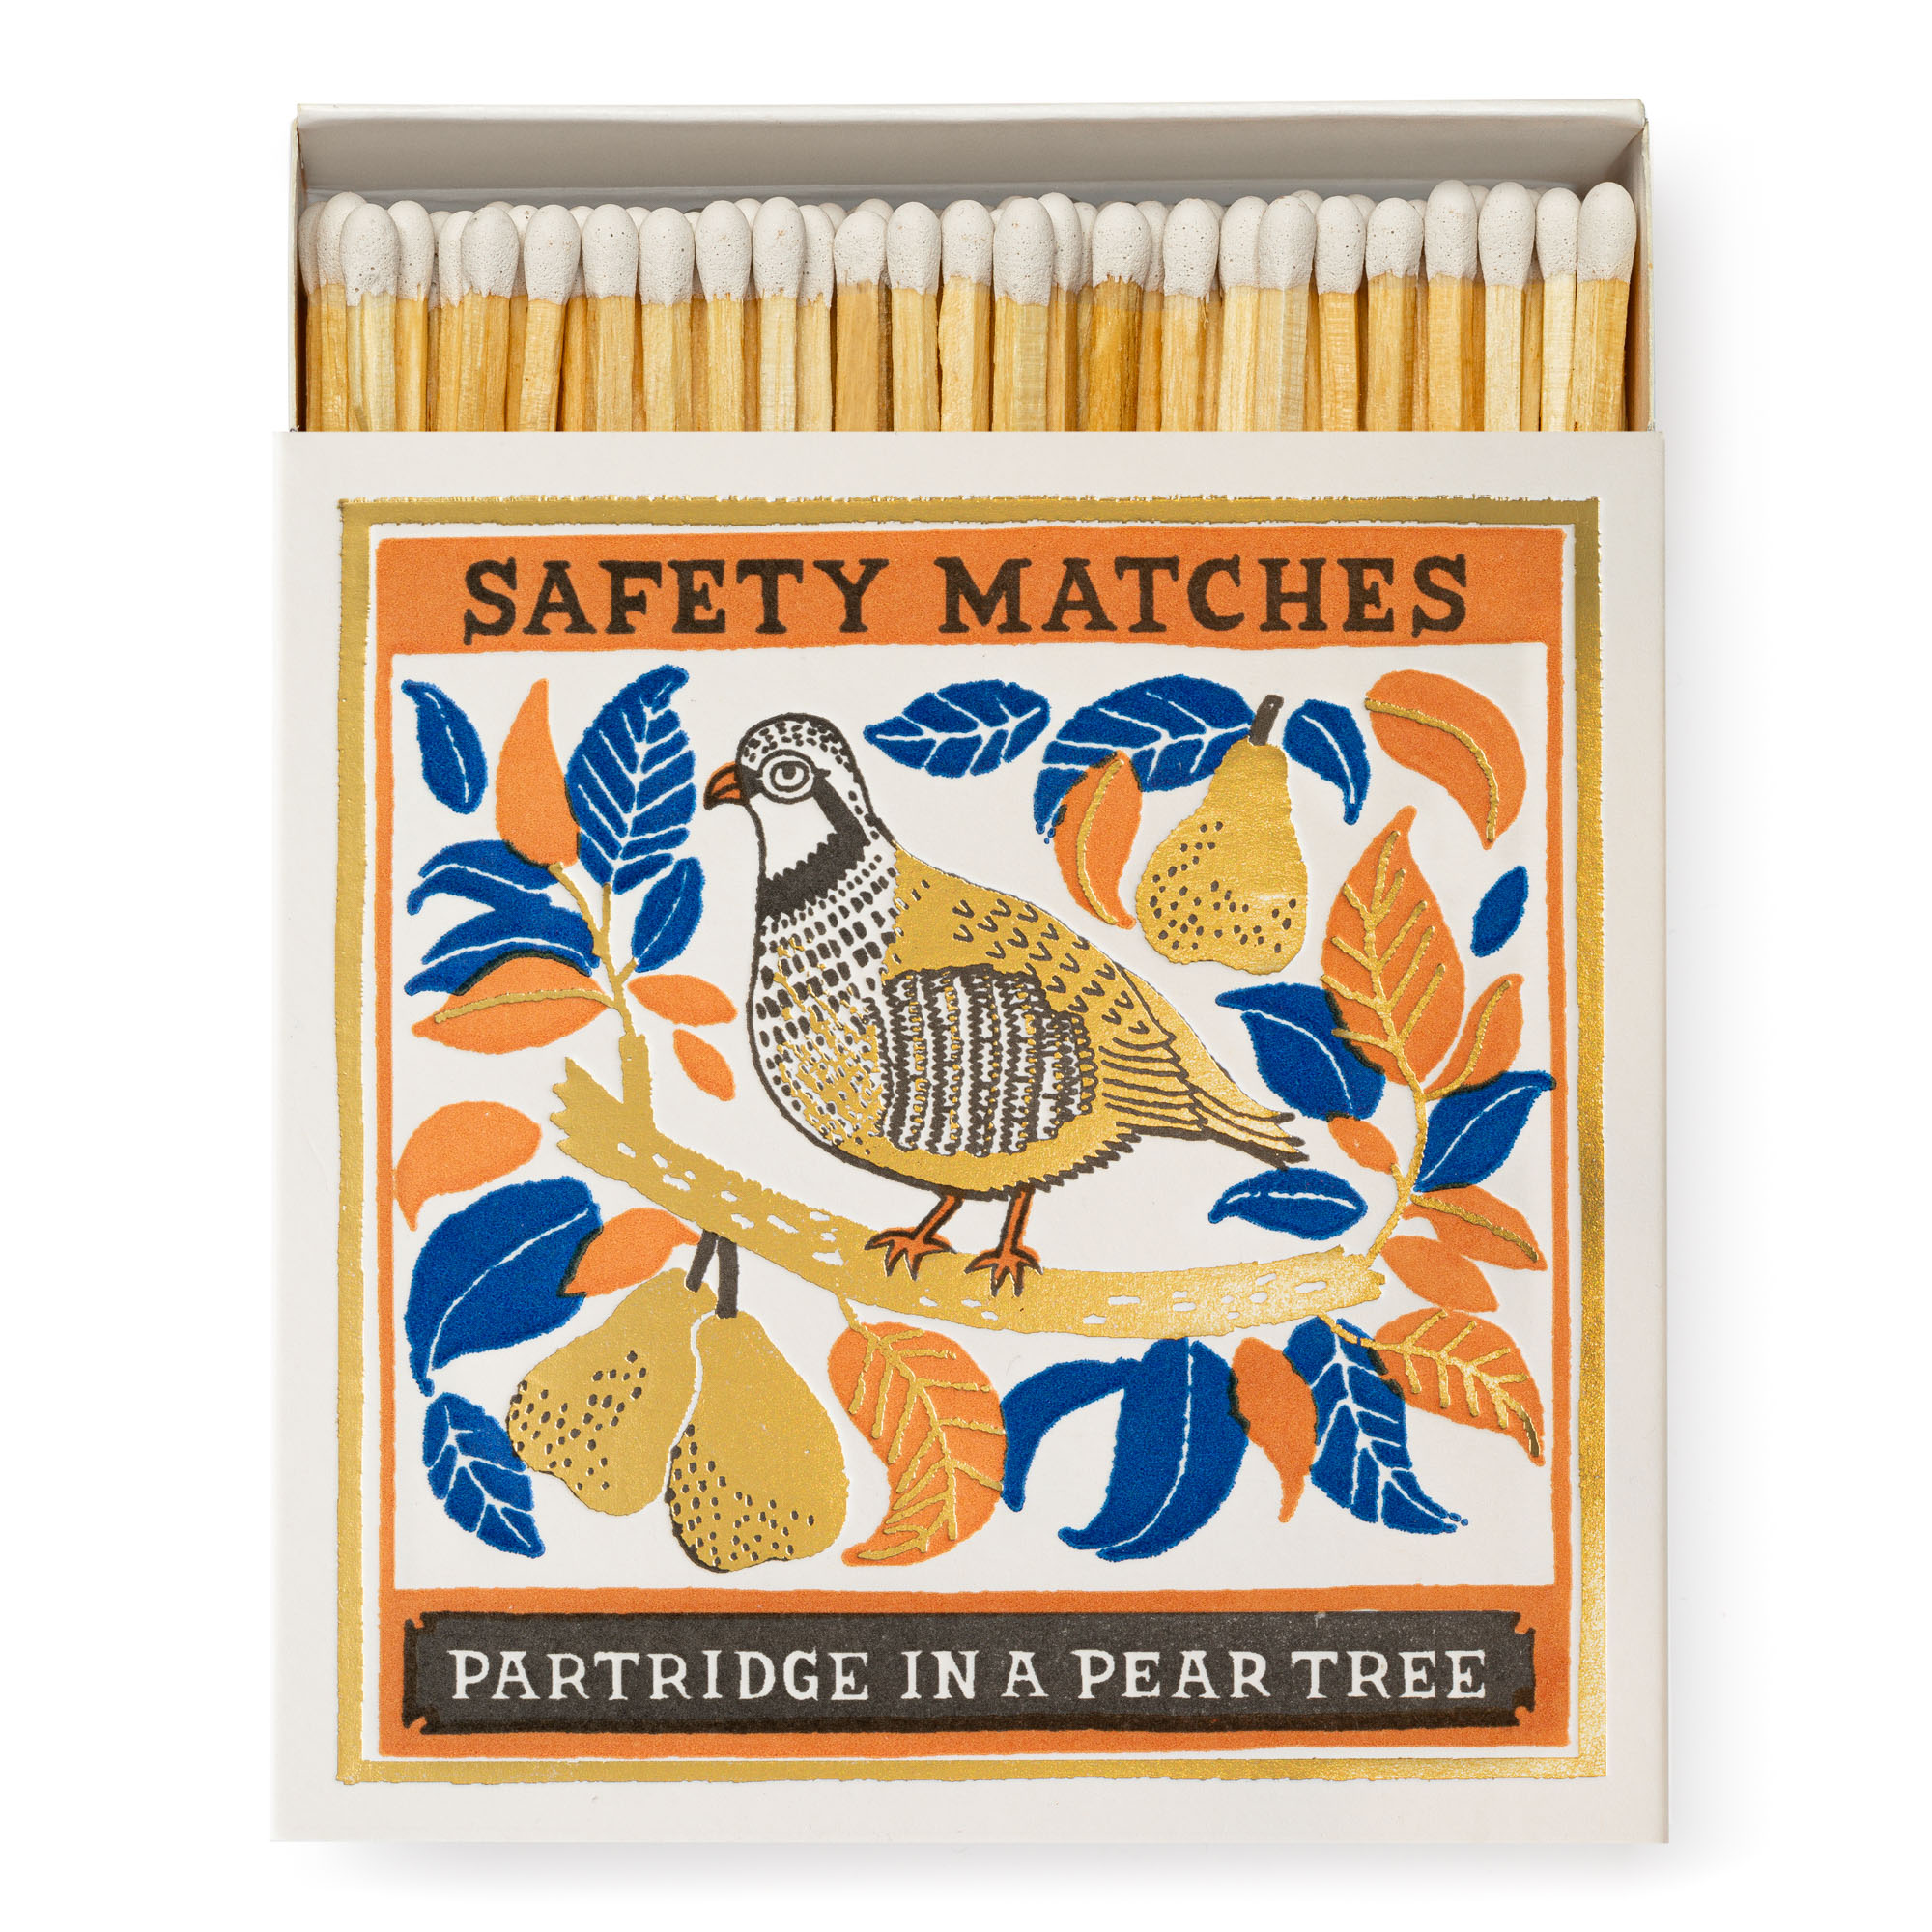 Partridge in a Pear Tree - Square Matchboxes - Charlotte Farmer - from Archivist Gallery 